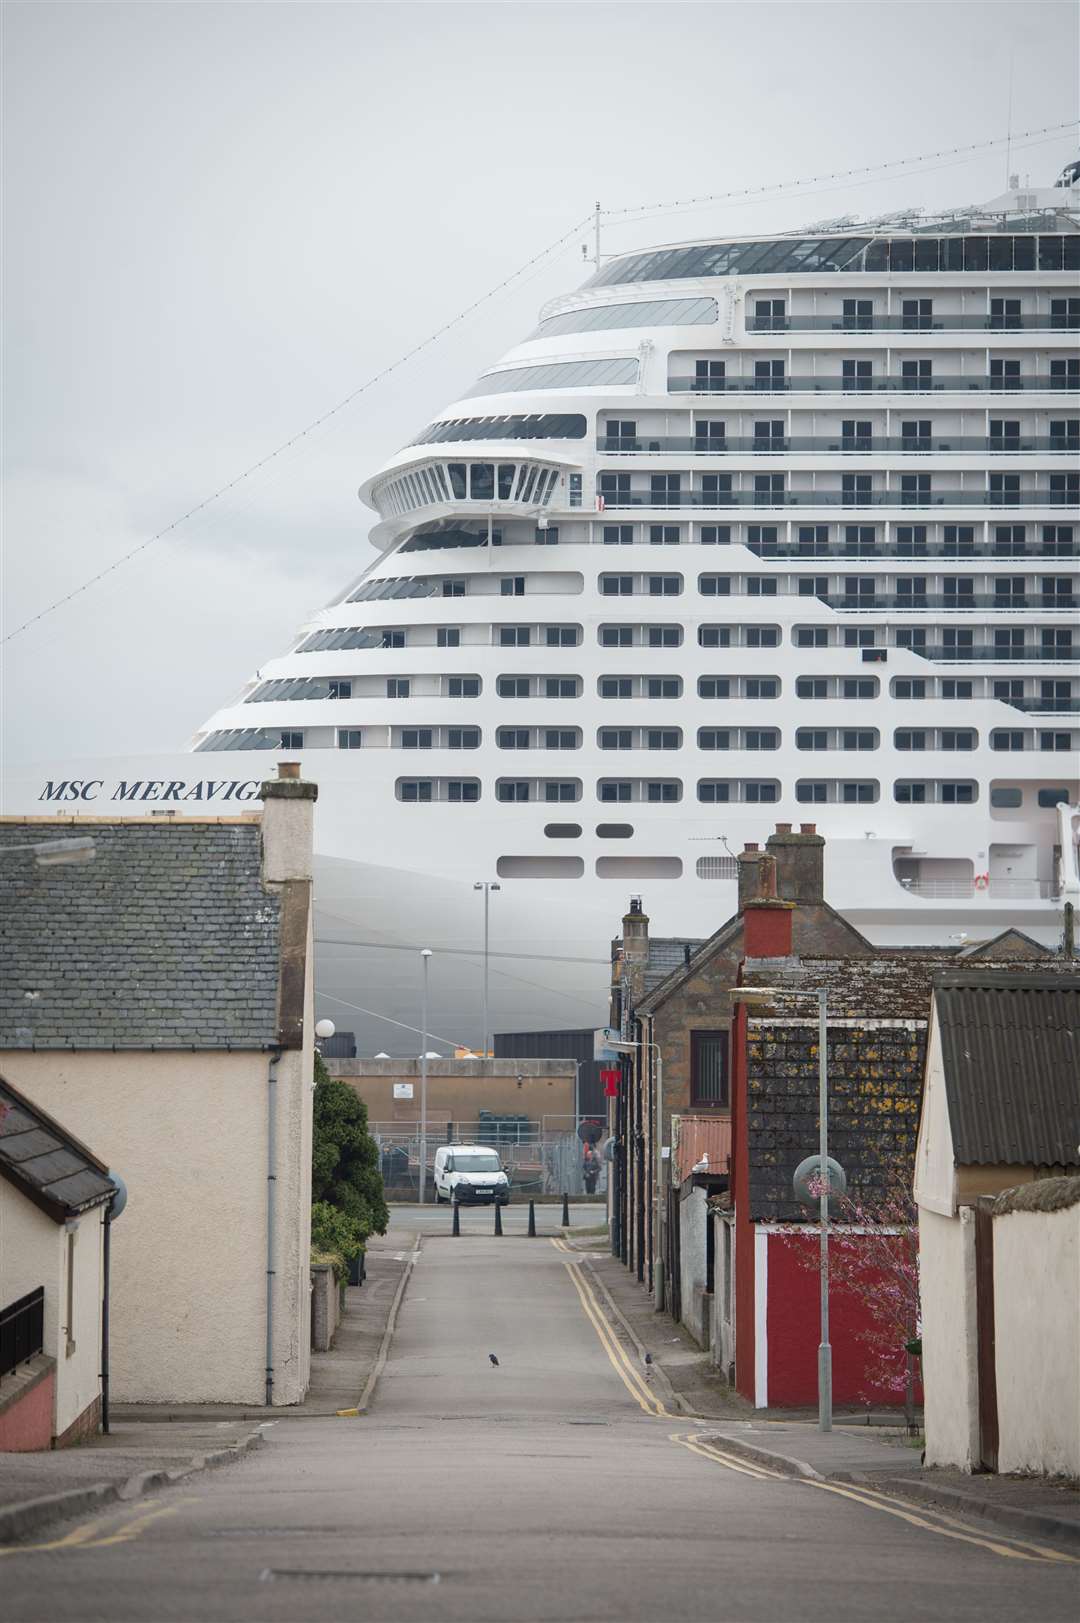 Cruise liners can make a big impression on the local landscape when they arrive. MSC Meraviglia, at the time the biggest ever cruise liner to visit Scottish waters, docked at Invergordon during an earlier visit. Picture: Callum Mackay.